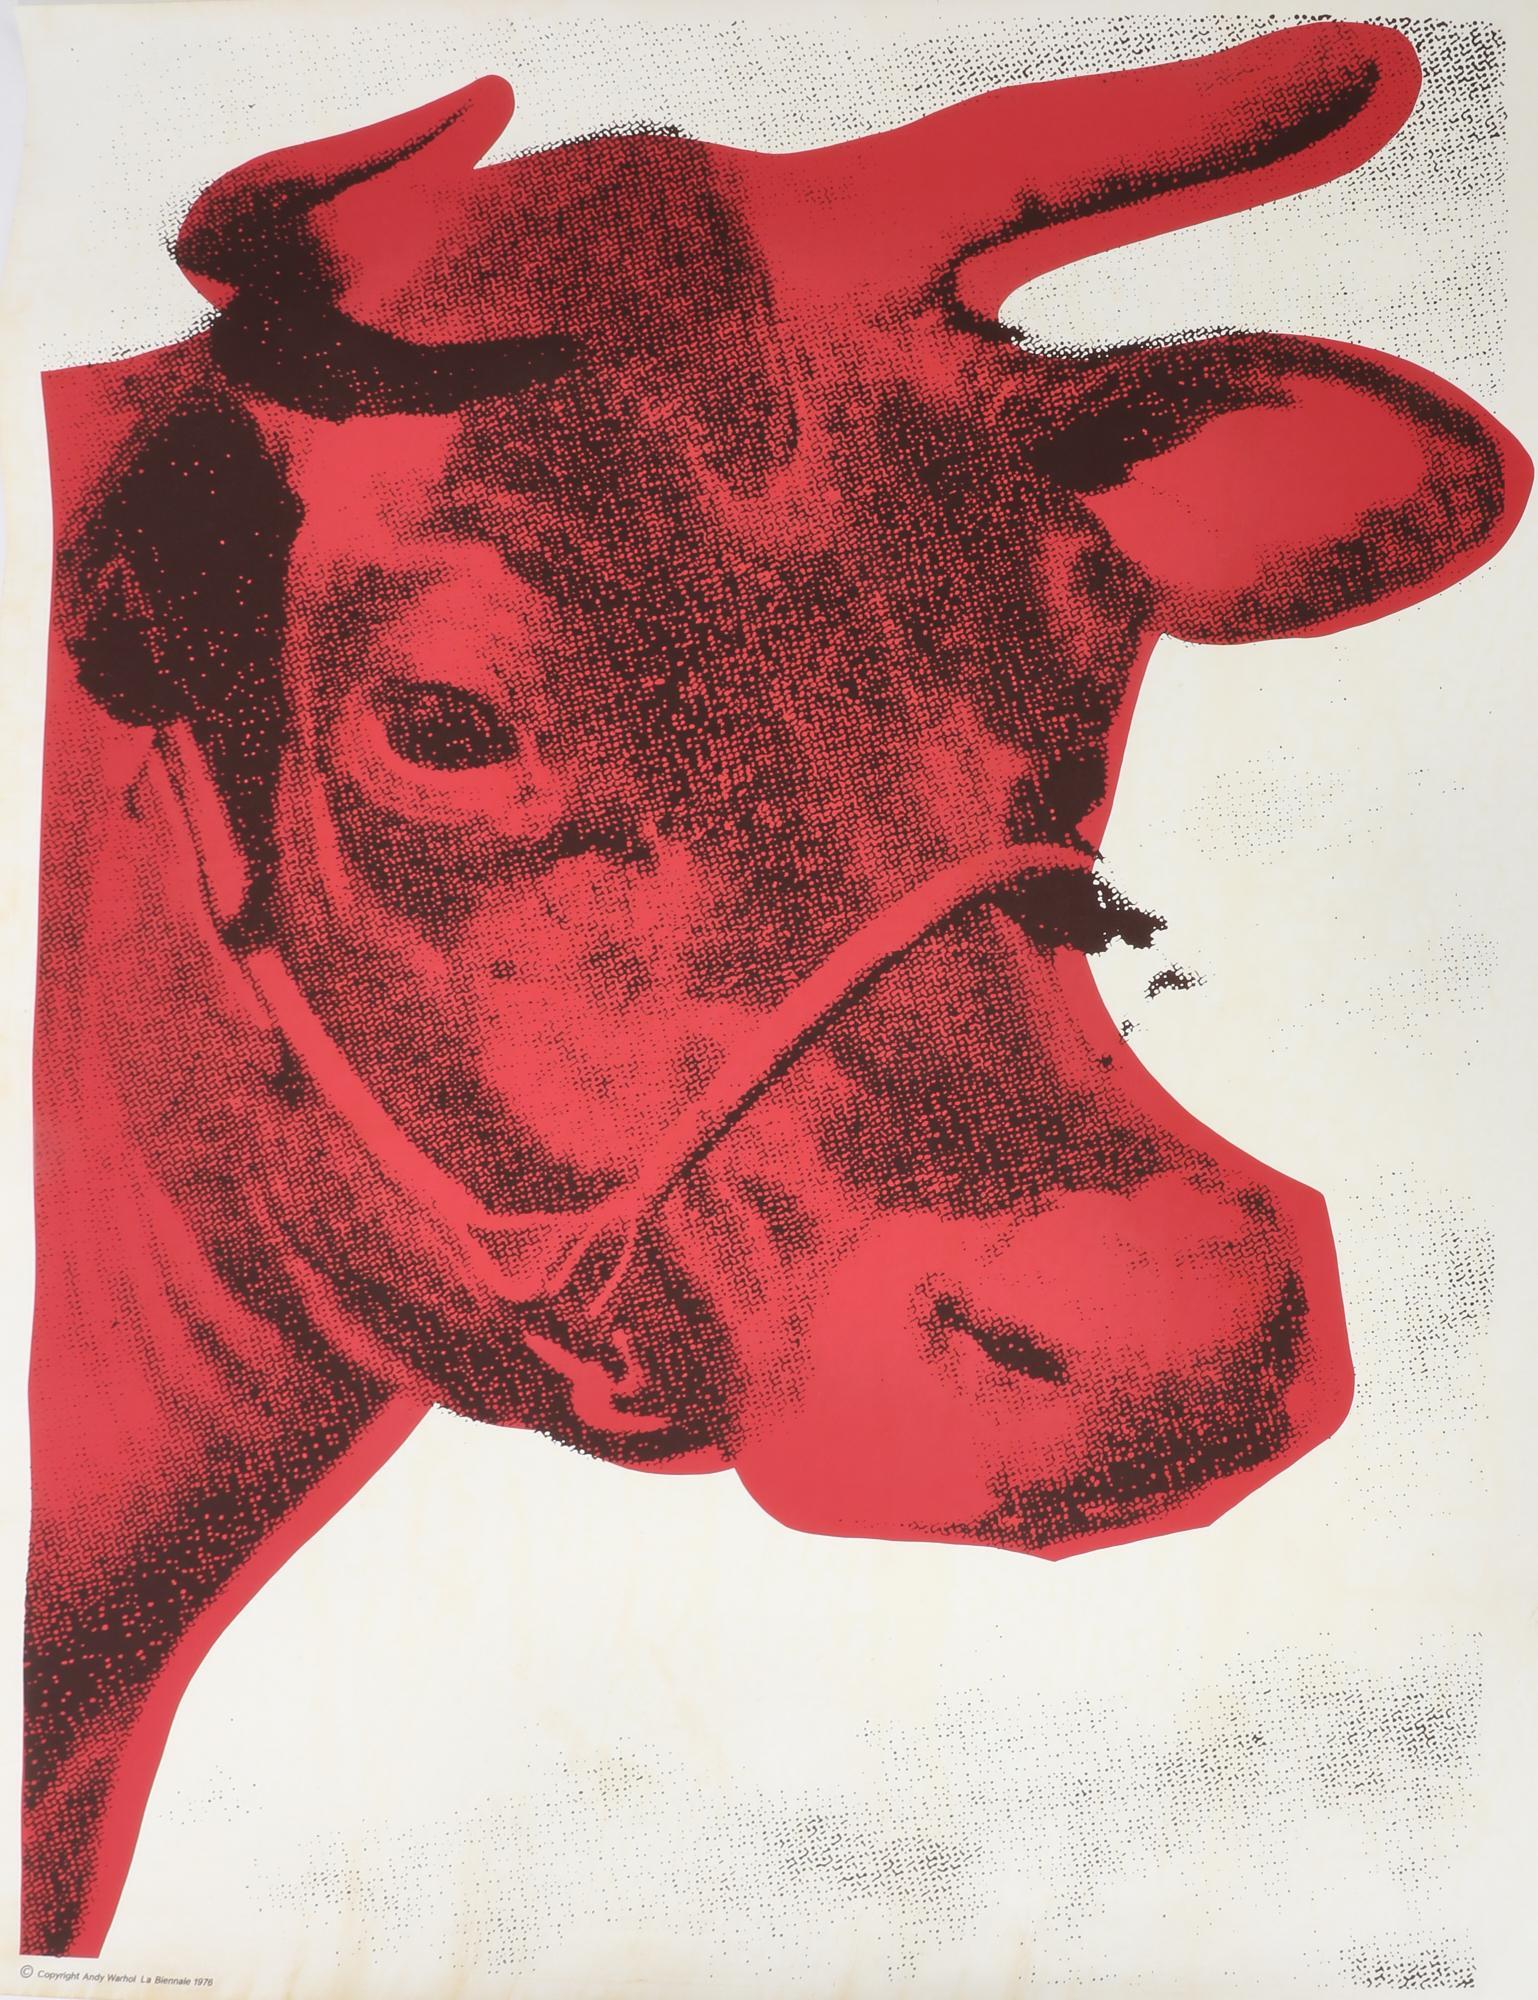 When did Andy Warhol paint the cow?